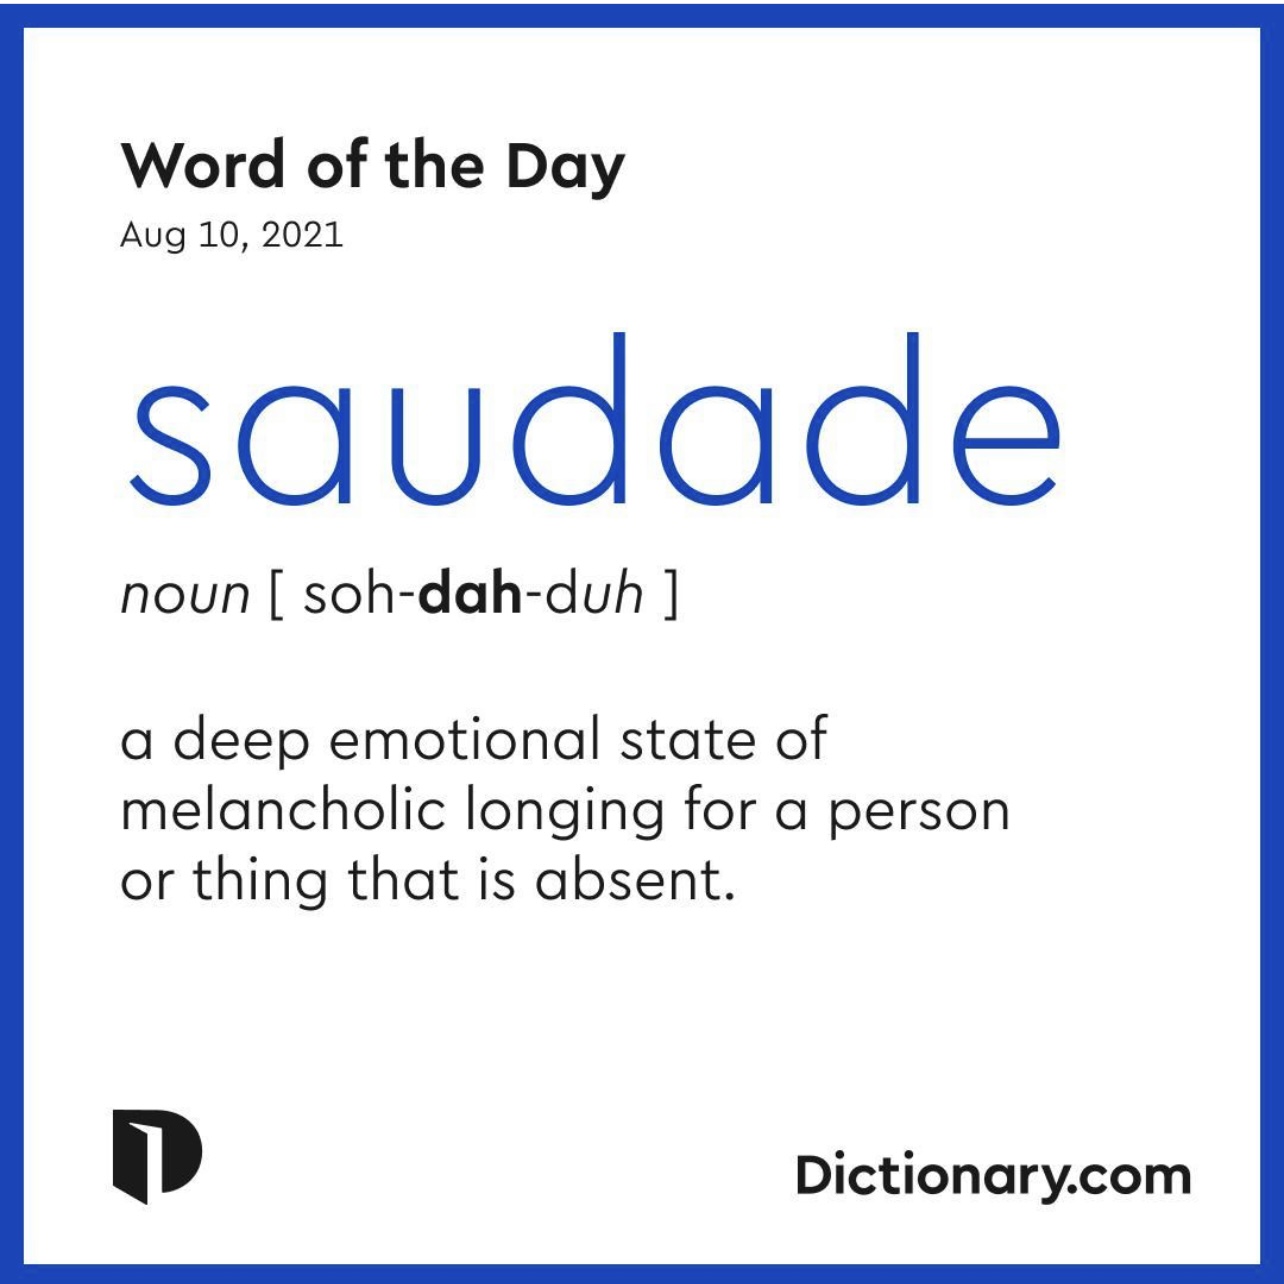 Saudade - Portuguese Word Definition | Poster